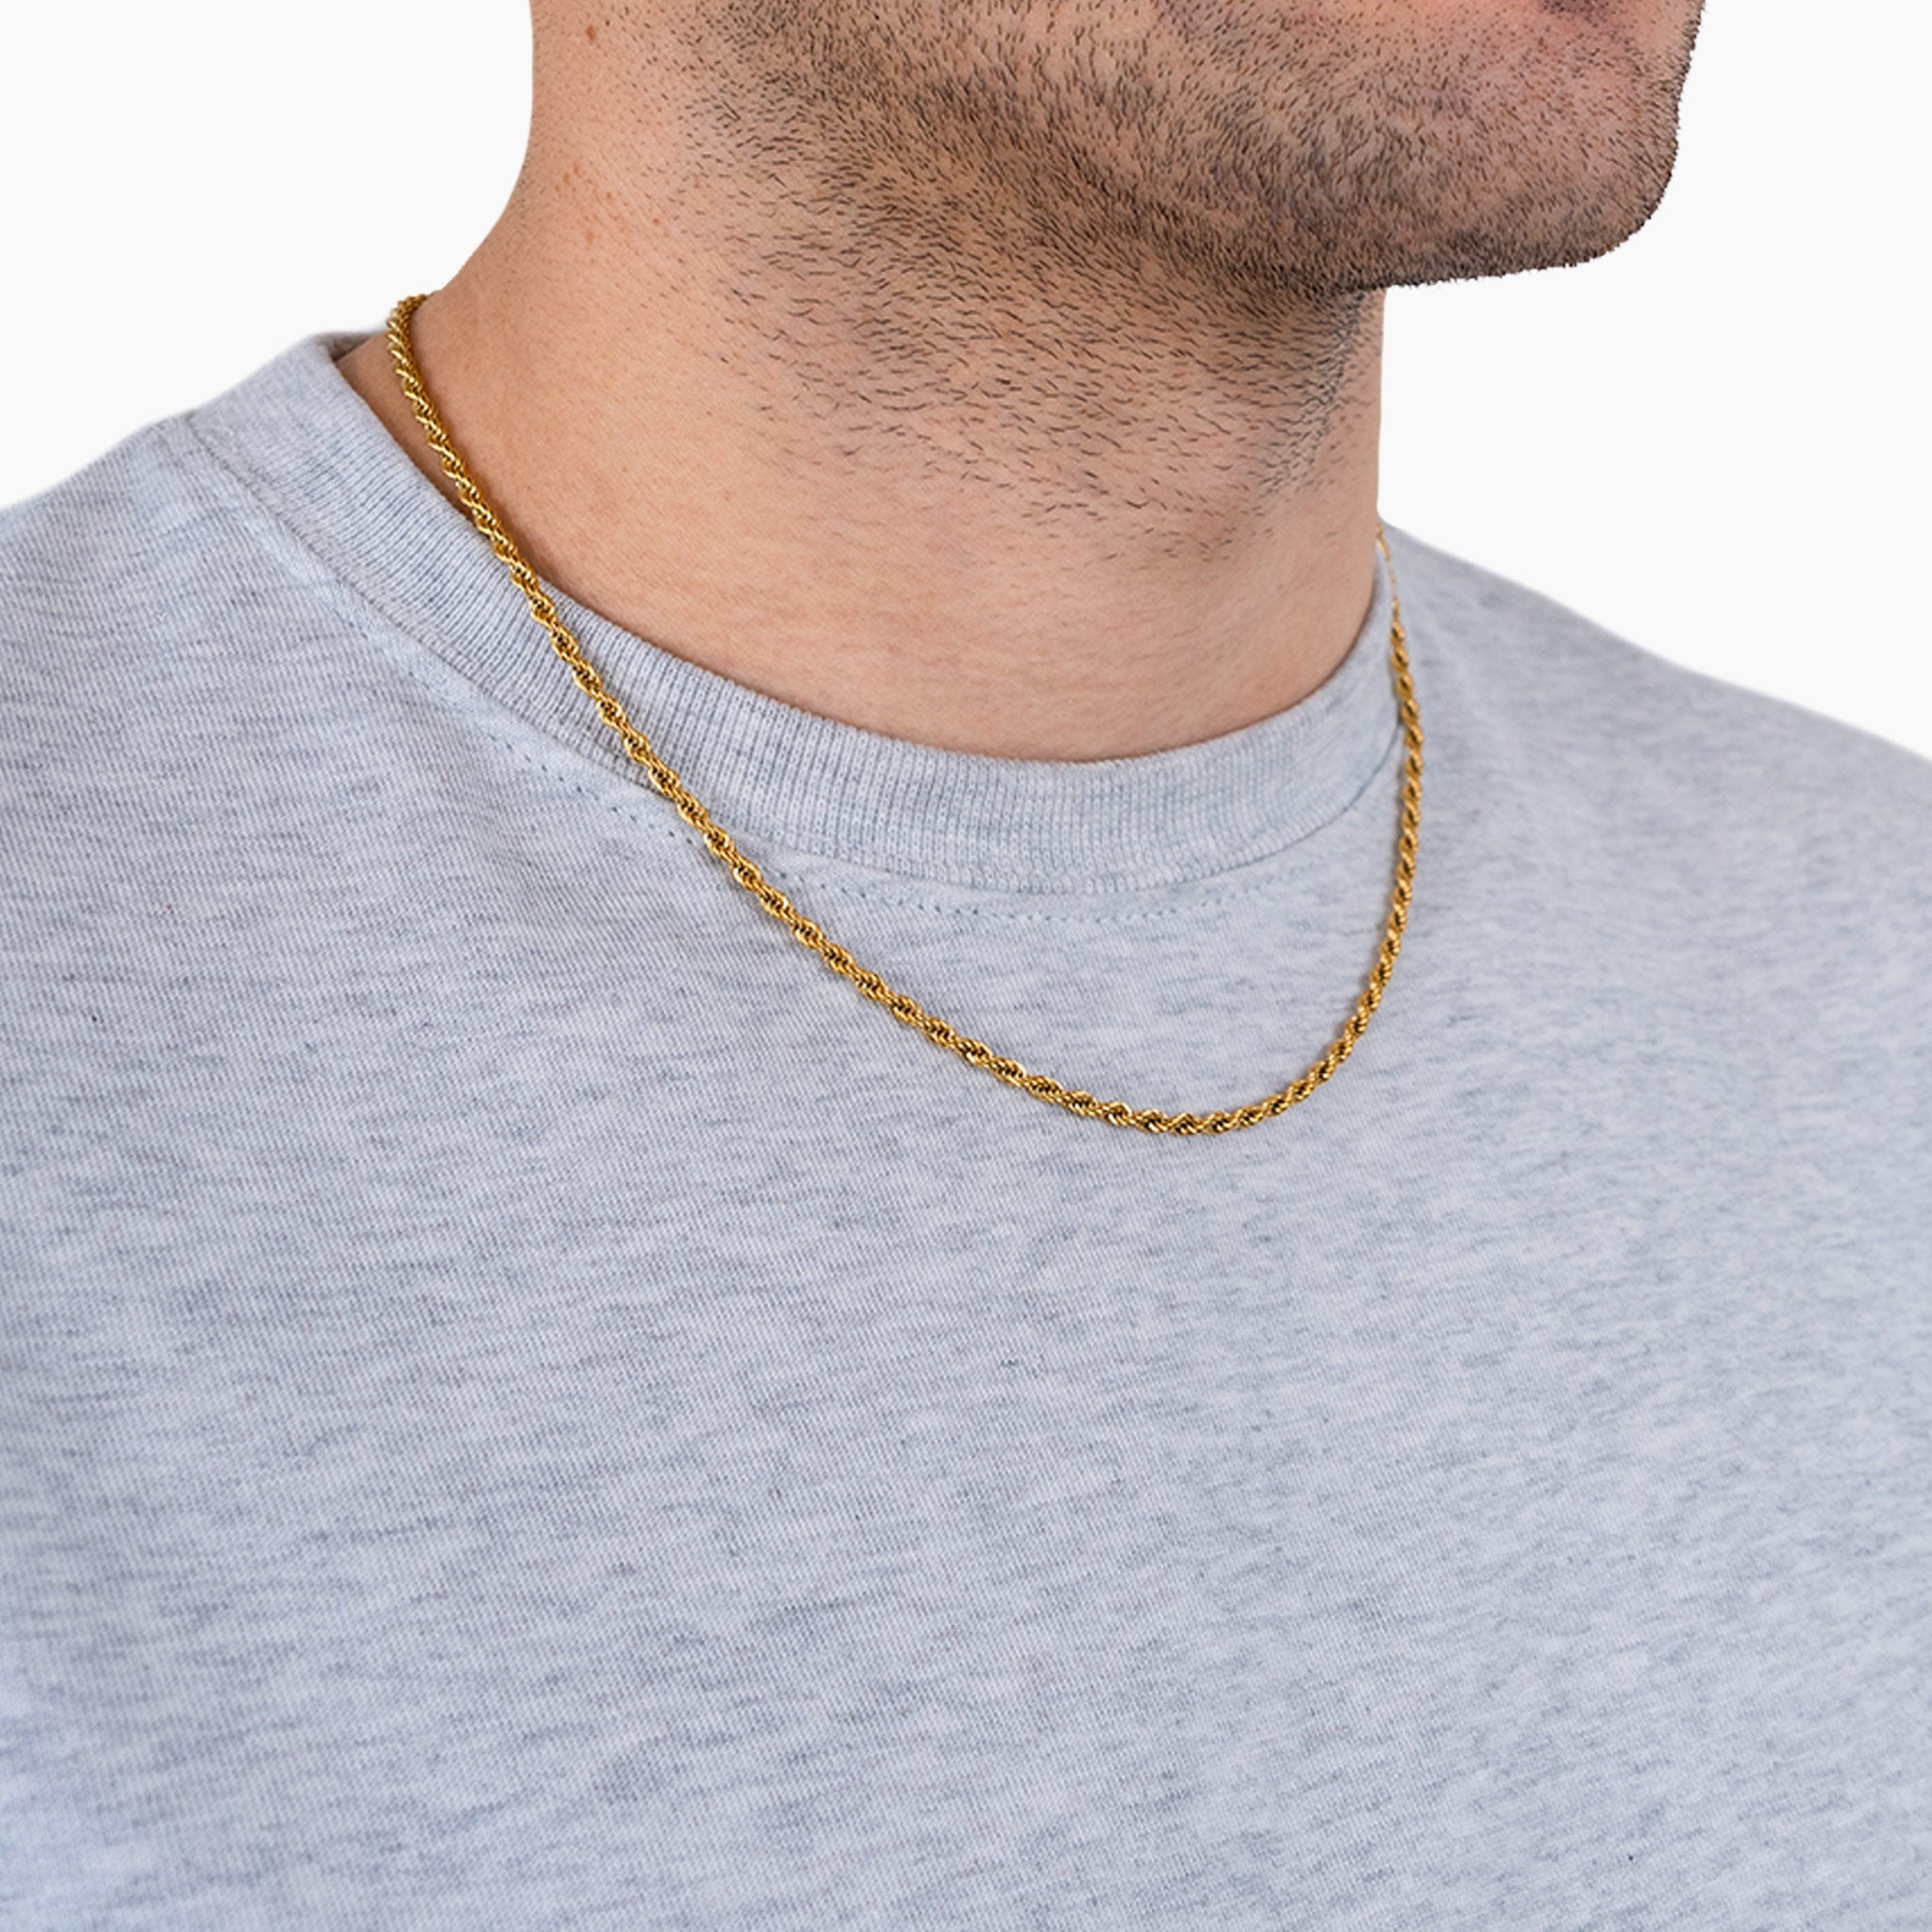 3mm Twisted Rope Chain - Gold